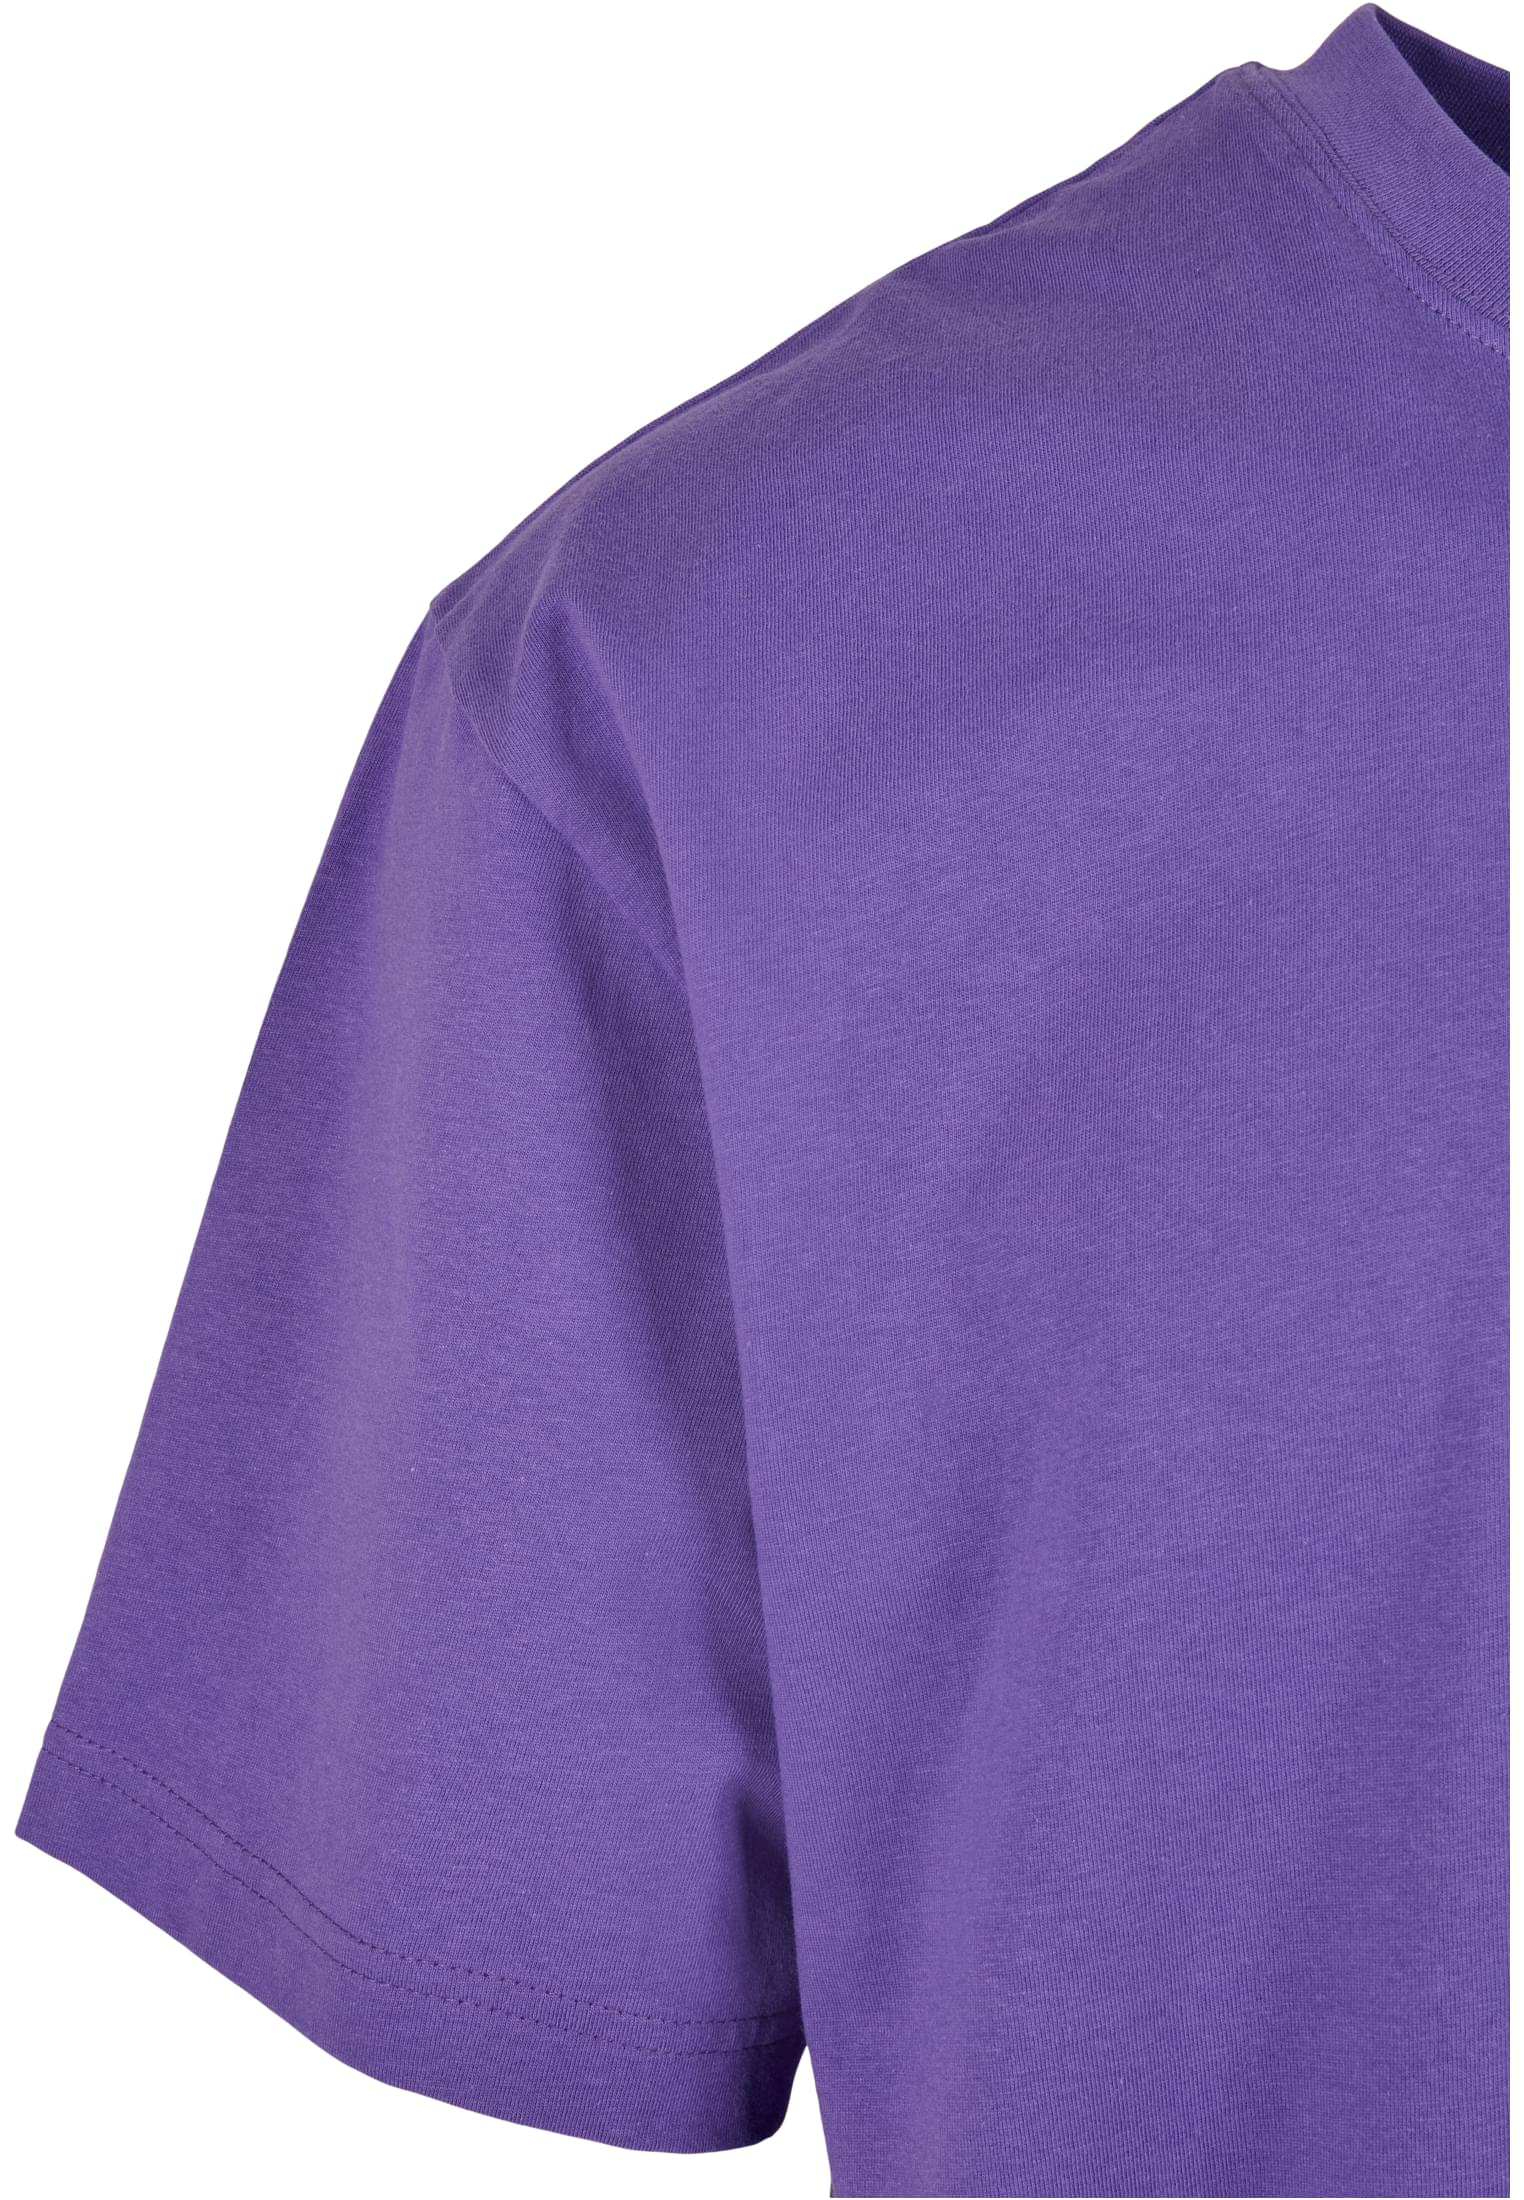 Plus Size Tall Tee in Farbe ultraviolet